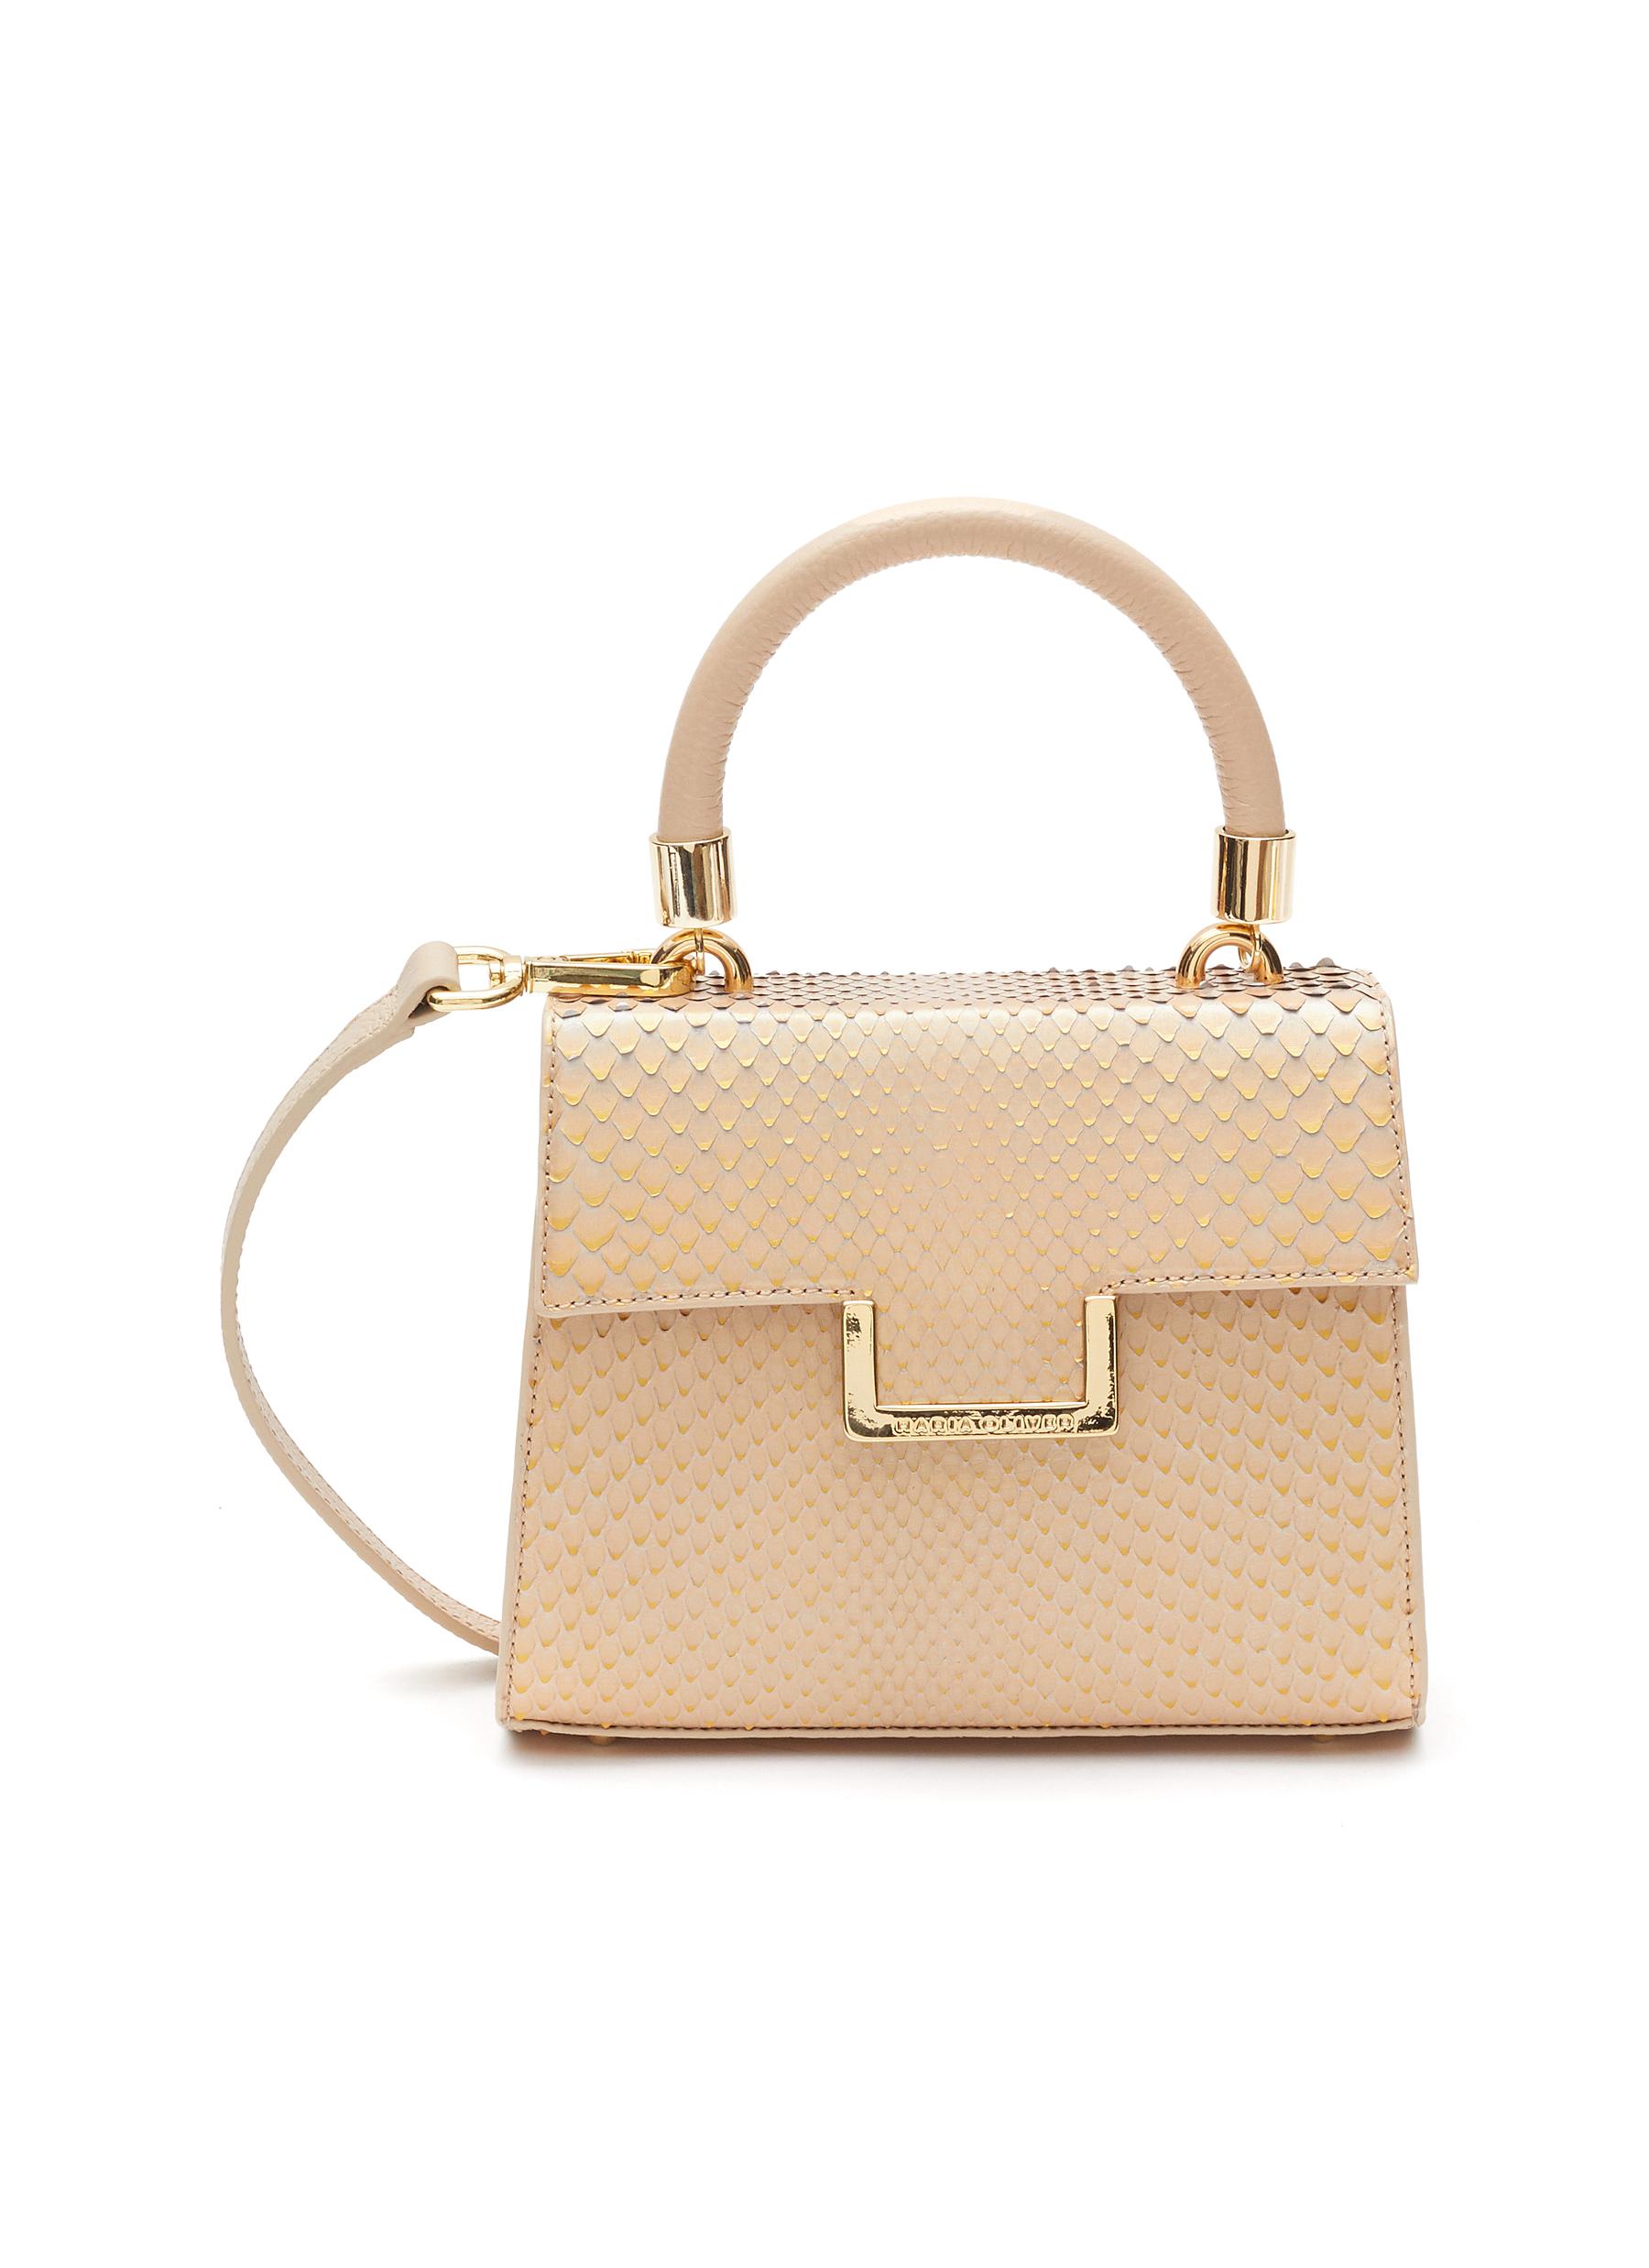 MARIA OLIVER MINI ‘MICHELLE' TOP HANDLE PYTHON LEATHER BAG